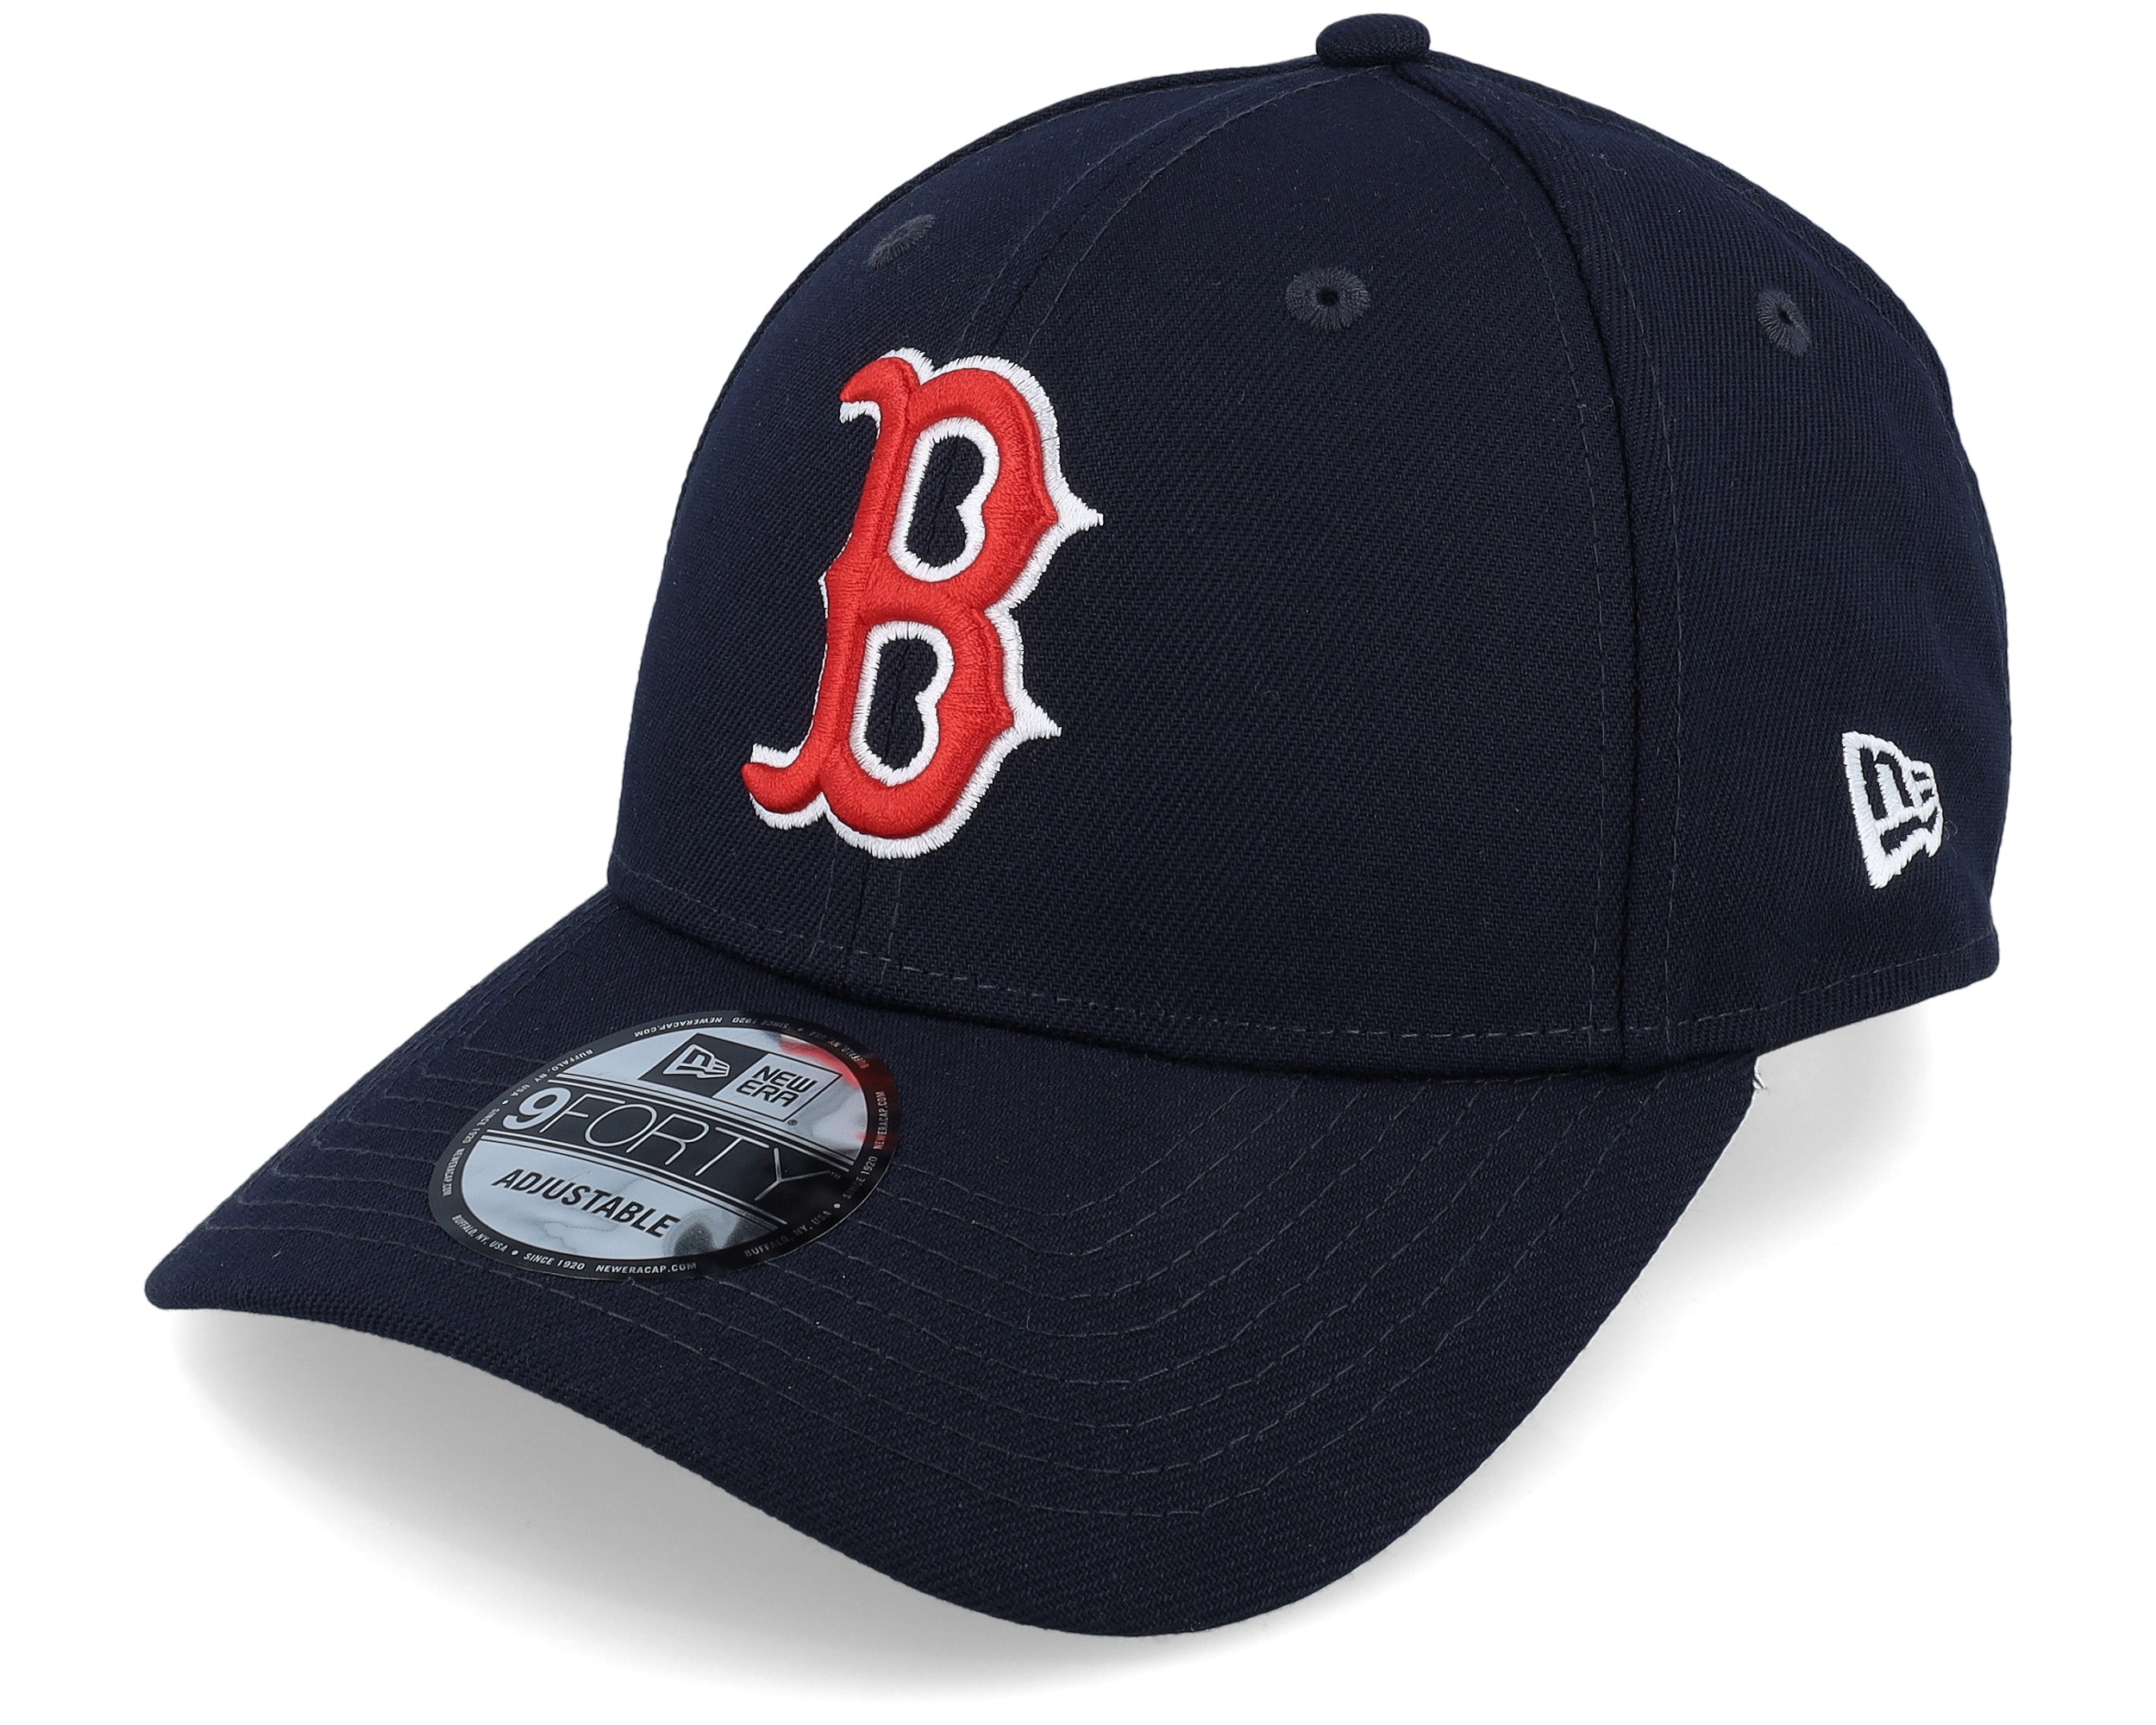 Boston Red Sox The League Game 940 Adjustable - New Era caps | Hatstore ...